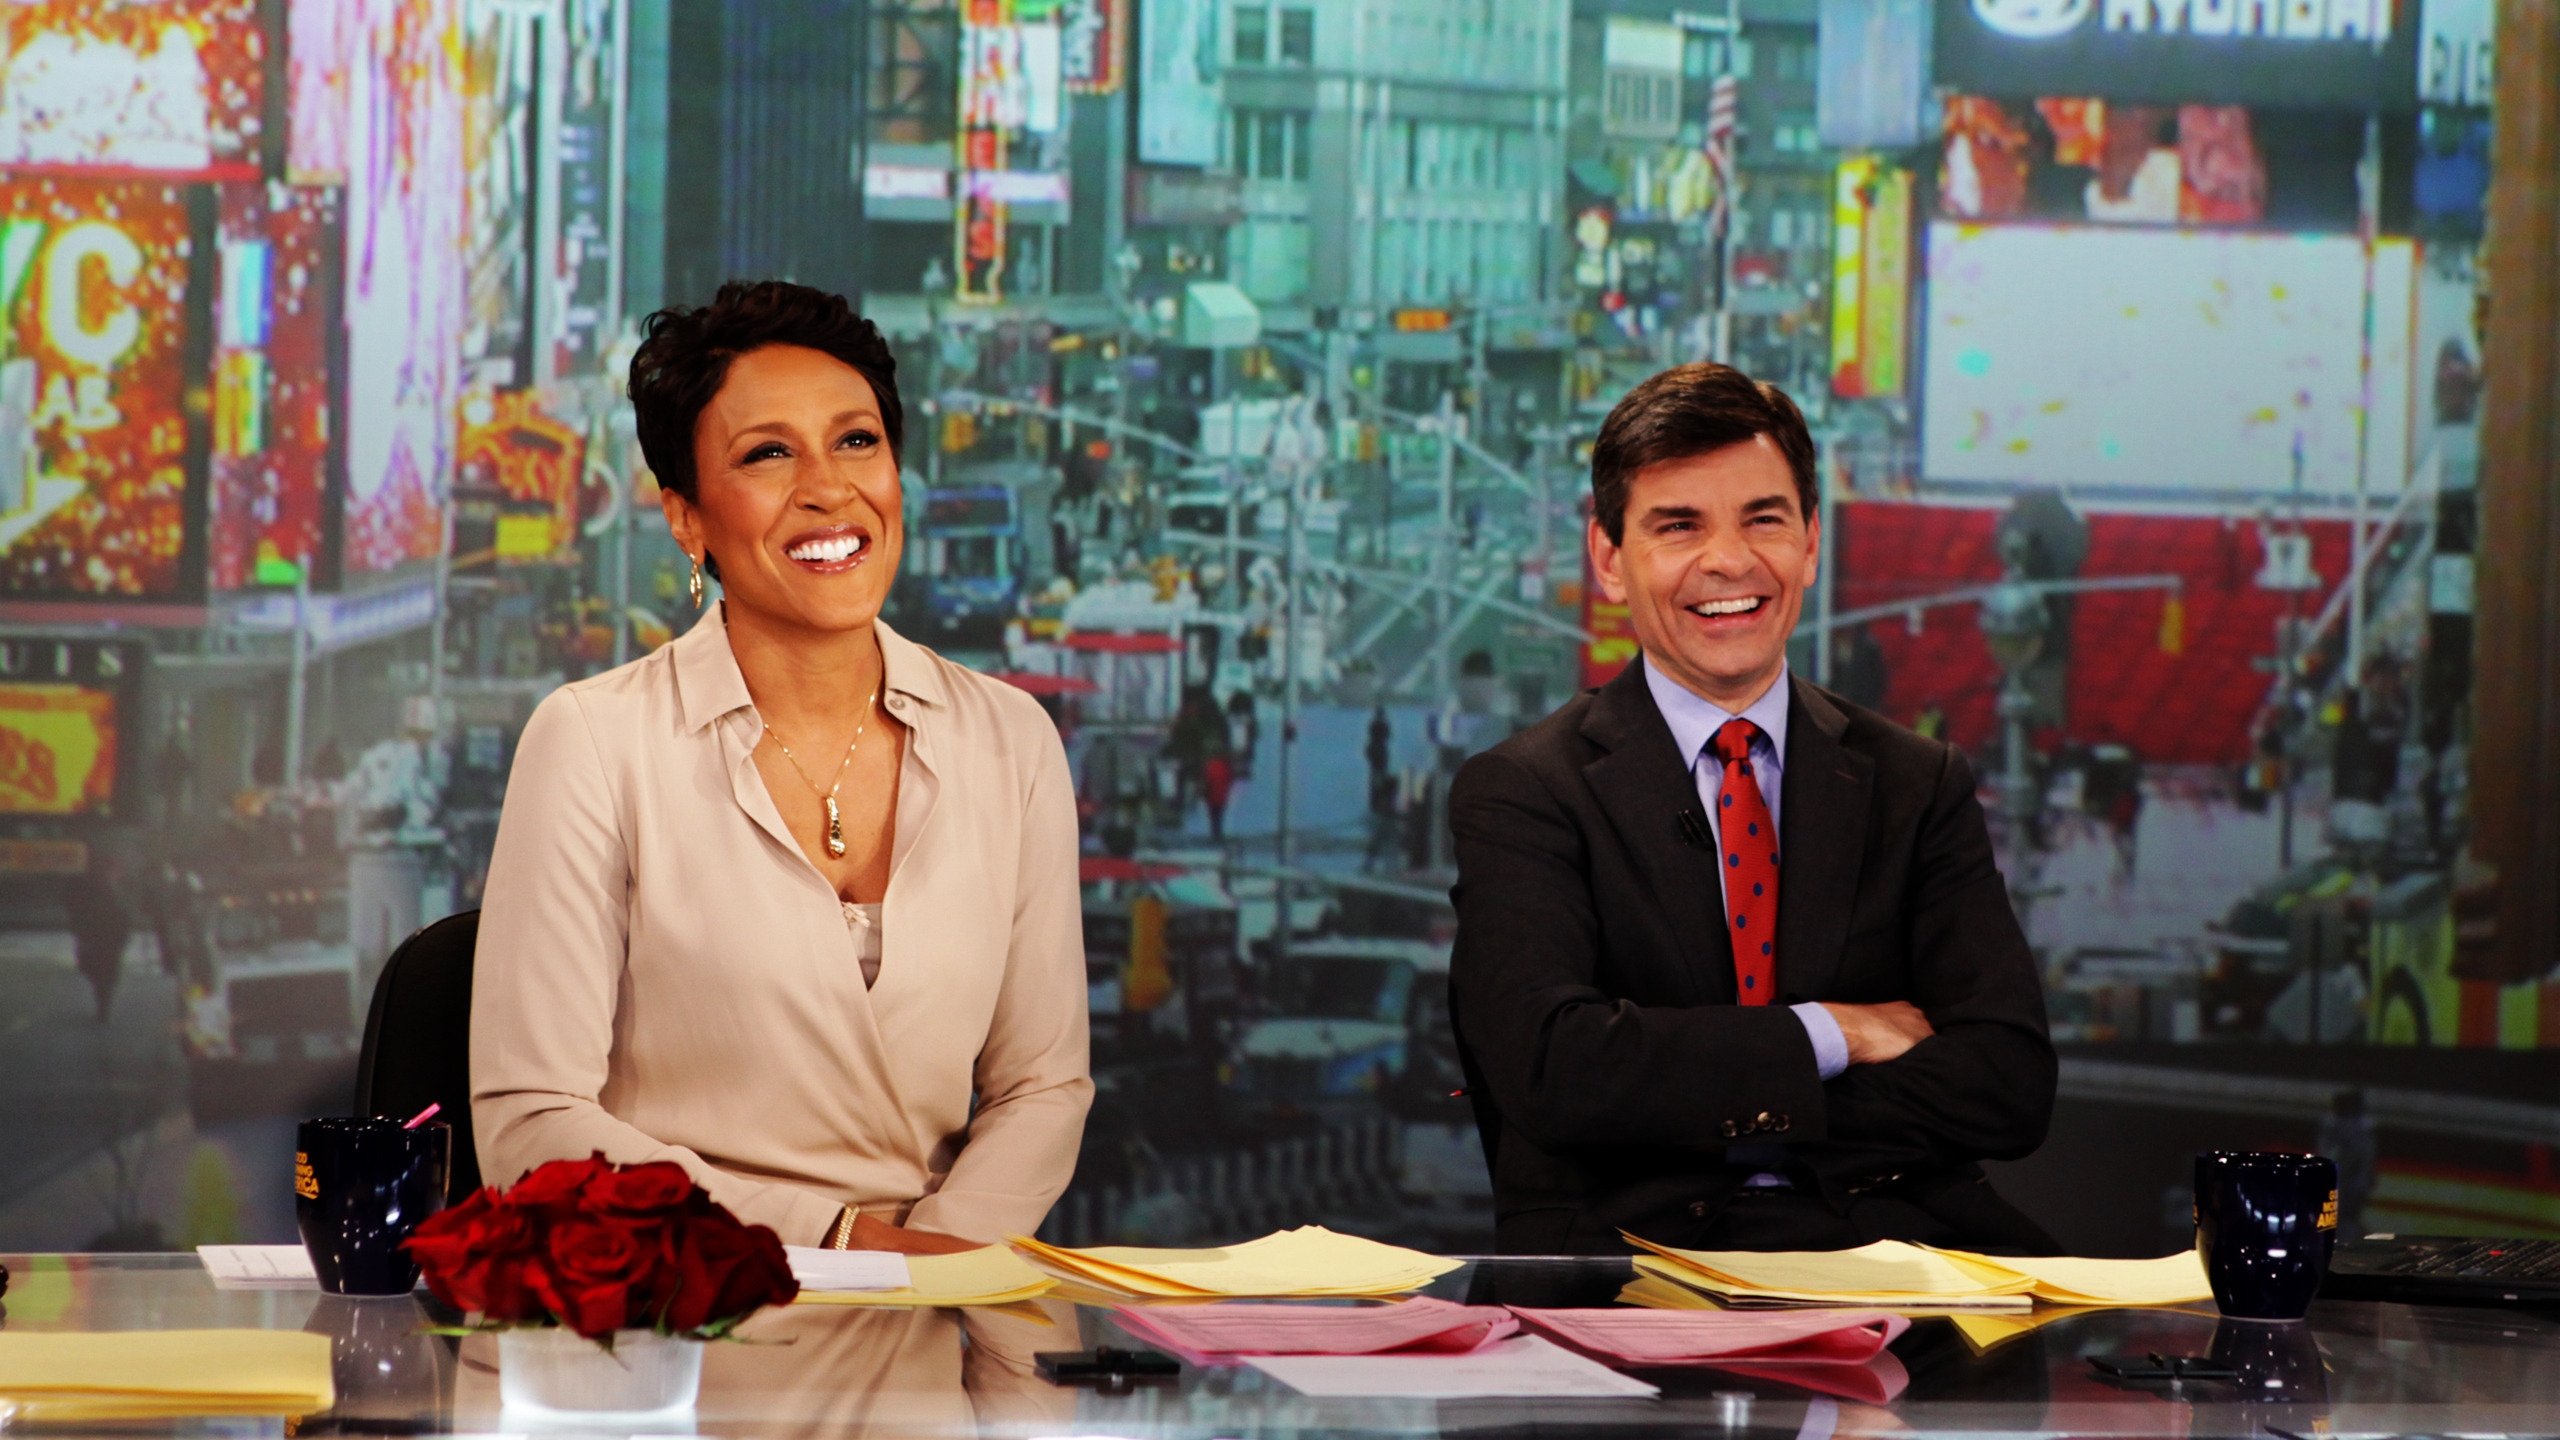 Robin Roberts and George Stephanopoulos for 2560x1440 HDTV resolution